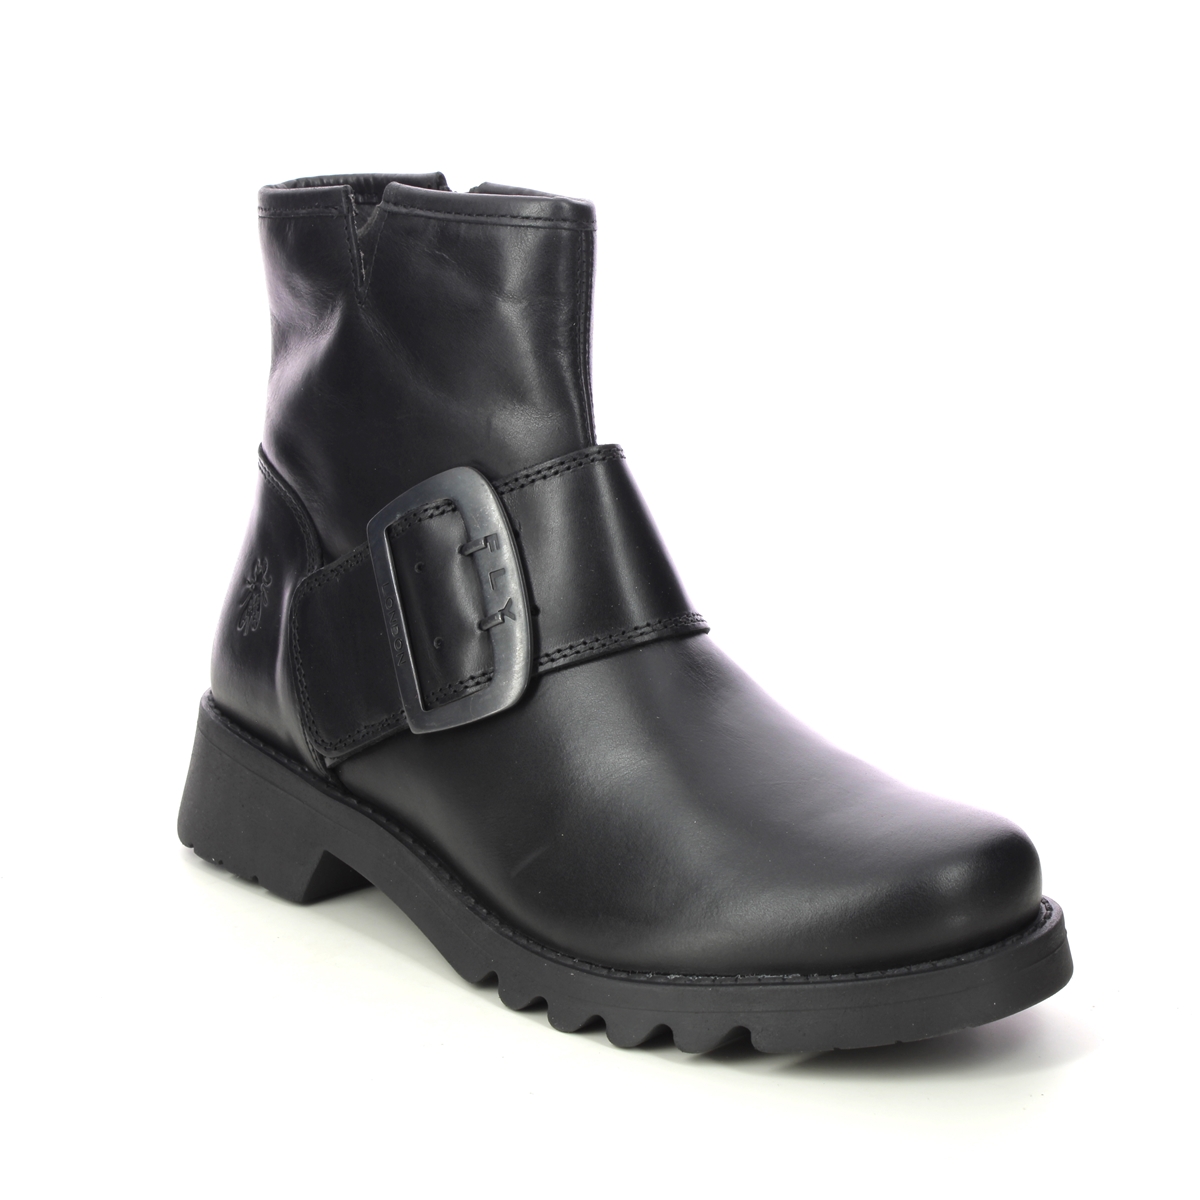 Fly London Rily   Ronin Black Leather Womens Ankle Boots P144991 In Size 40 In Plain Black Leather